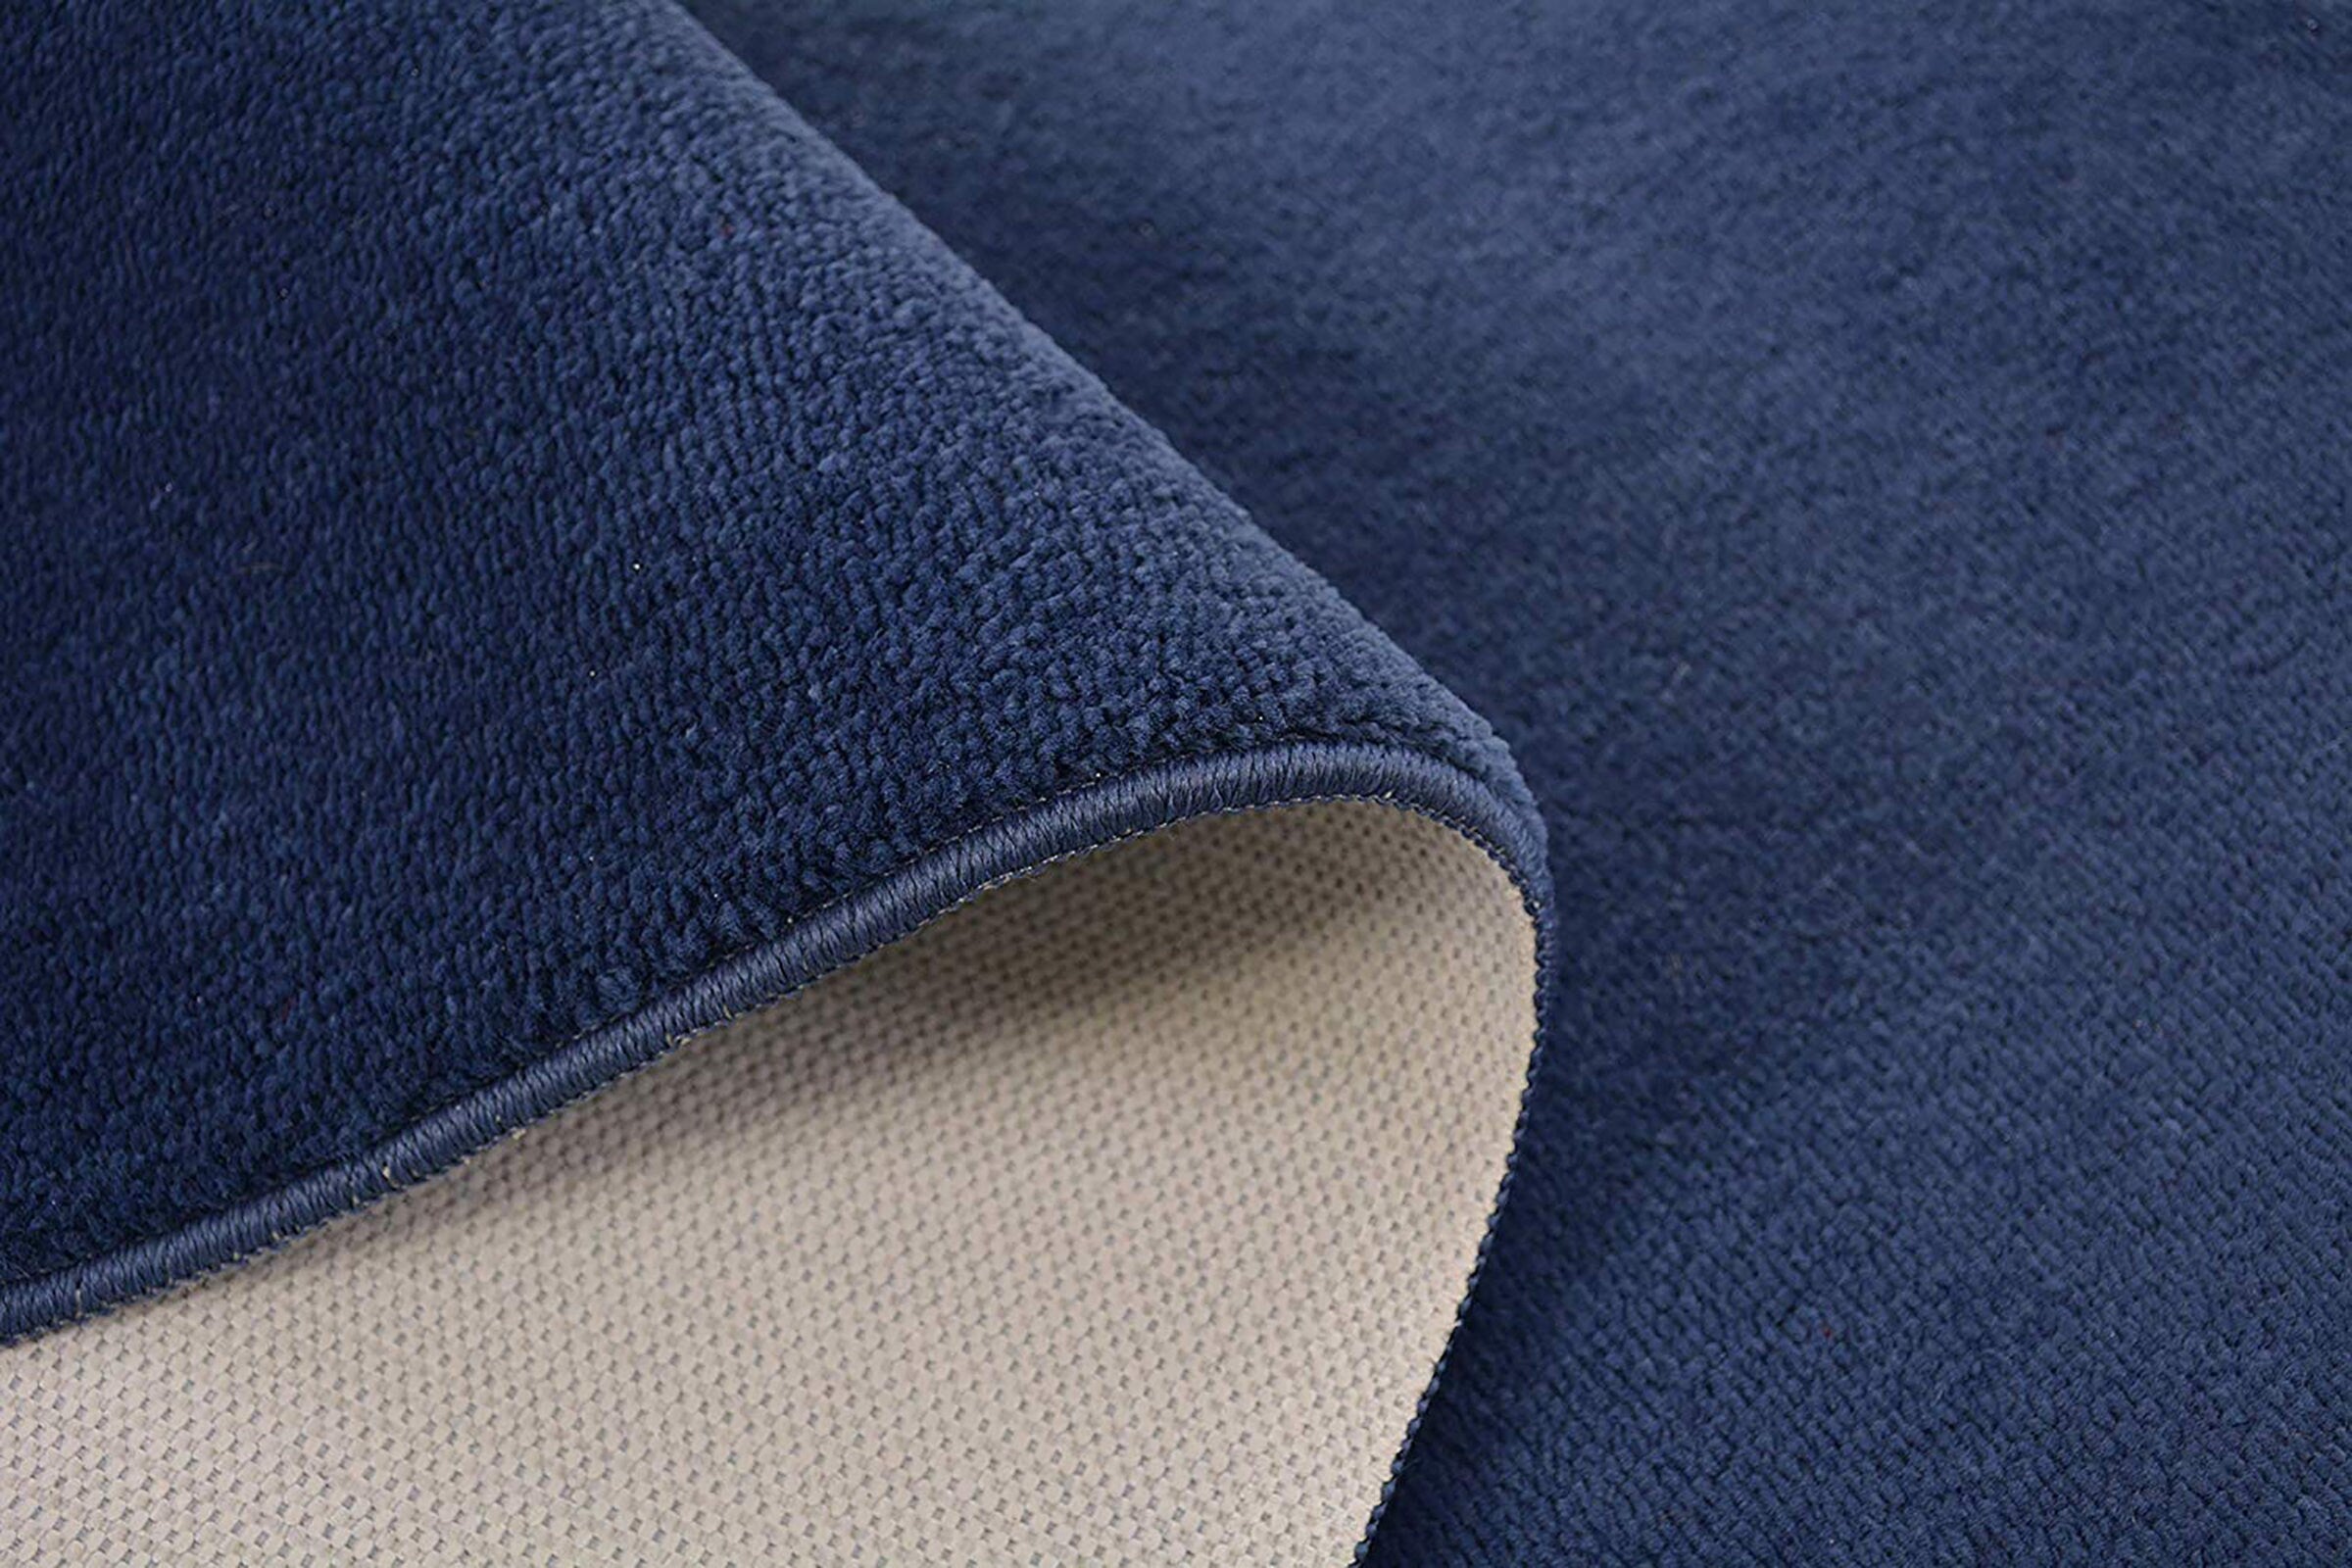 Machine Washable Custom Size Runner Rug Solid Navy Blue Color Skid Resistant Rug Runner Customize Up to 50 Feet and 36 Inch Width Runner Rug-10